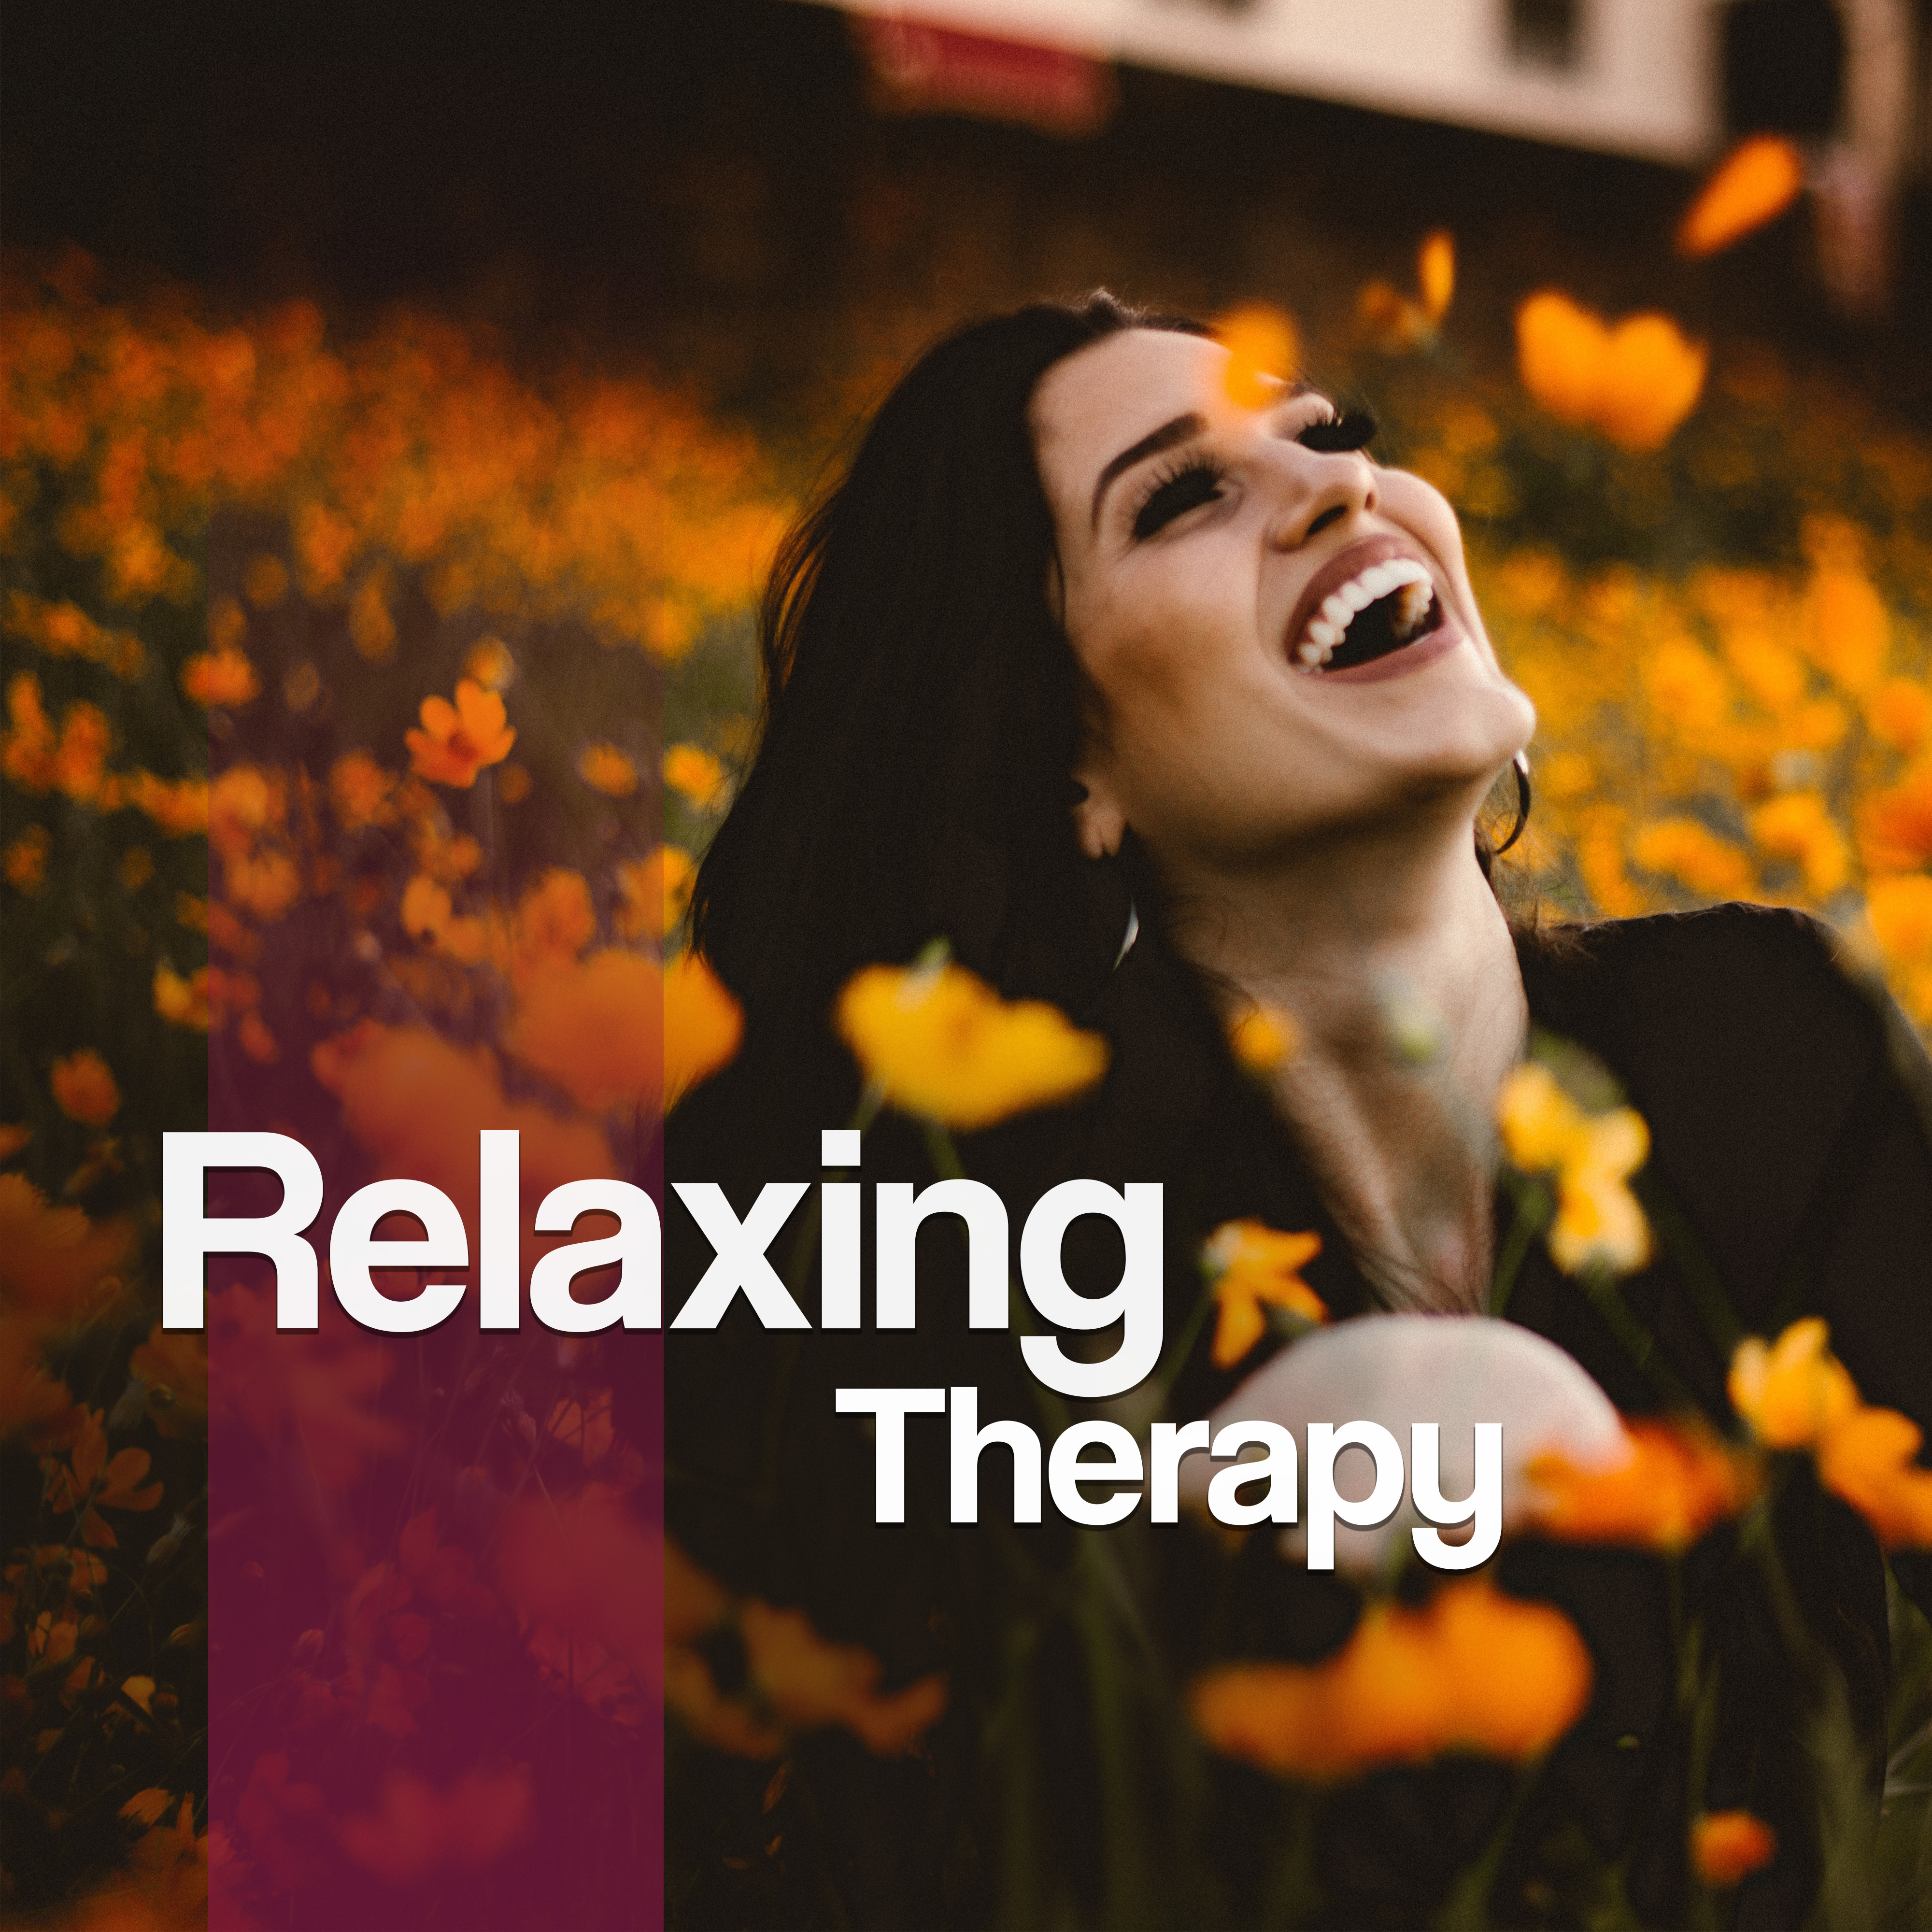 Relaxing Therapy – Soft Music for Relaxation, Calmness, Harmony, Pure Sleep, Nature Sounds, Oriental Music, Peaceful Mind